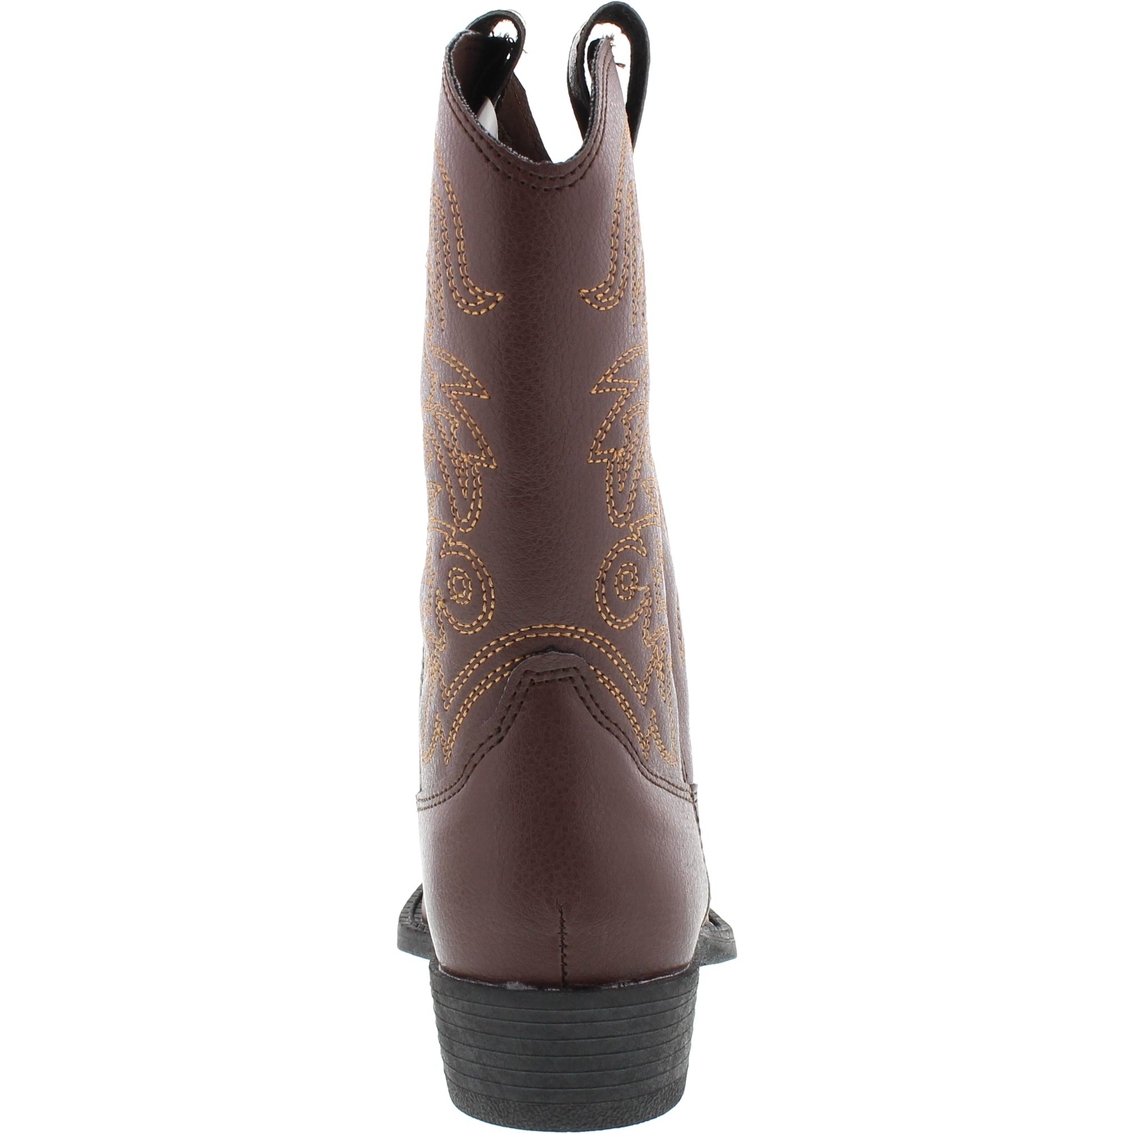 Deer Stags Ranch Boys Cowboy Boots - Image 4 of 5